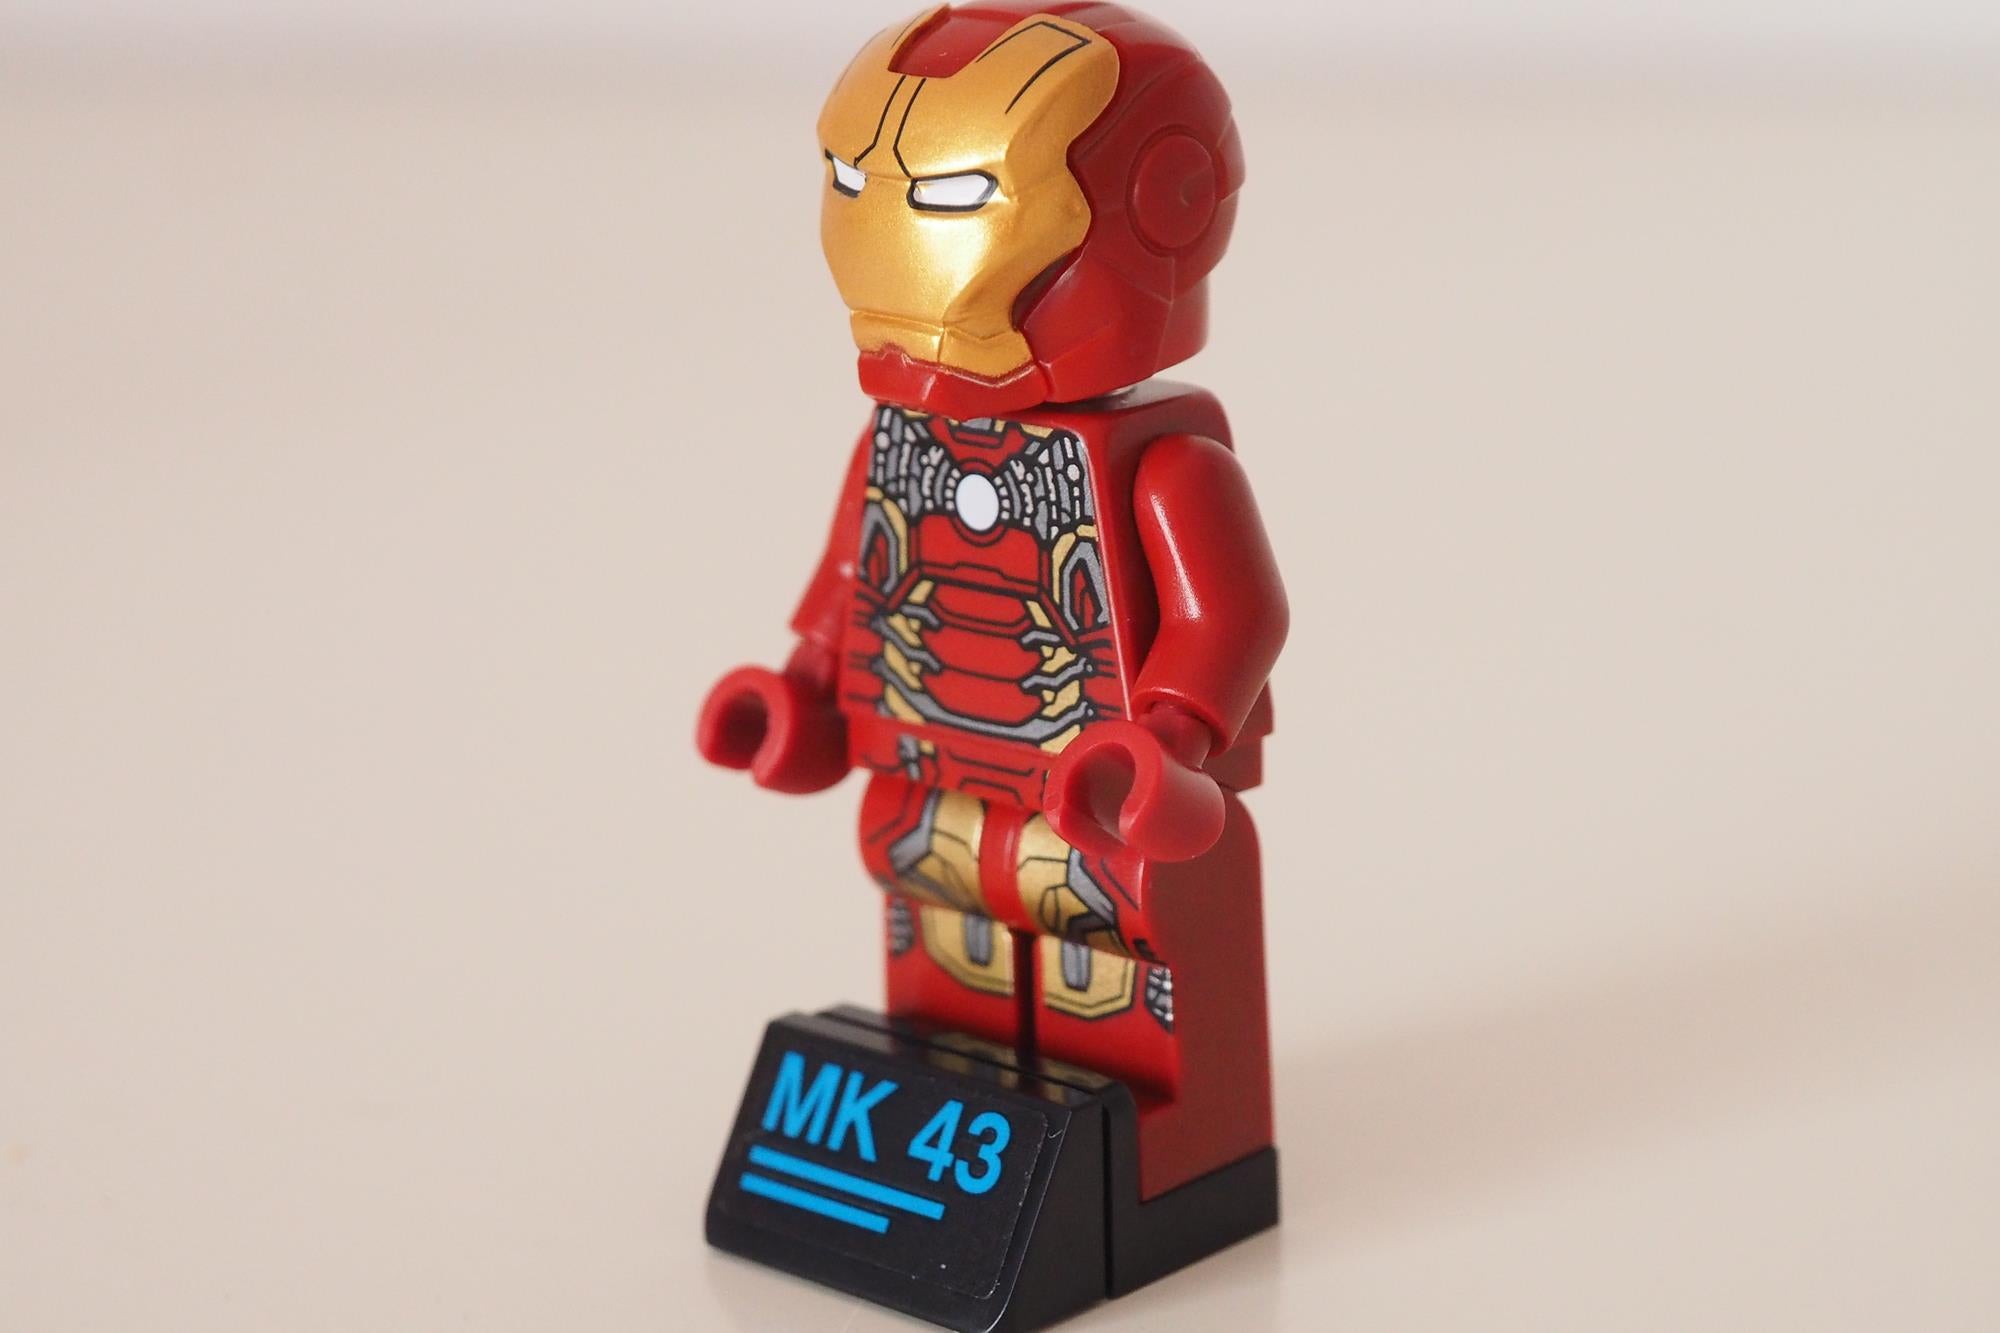 LEGO Iron Man minifigure labeled MK 43 on display stand